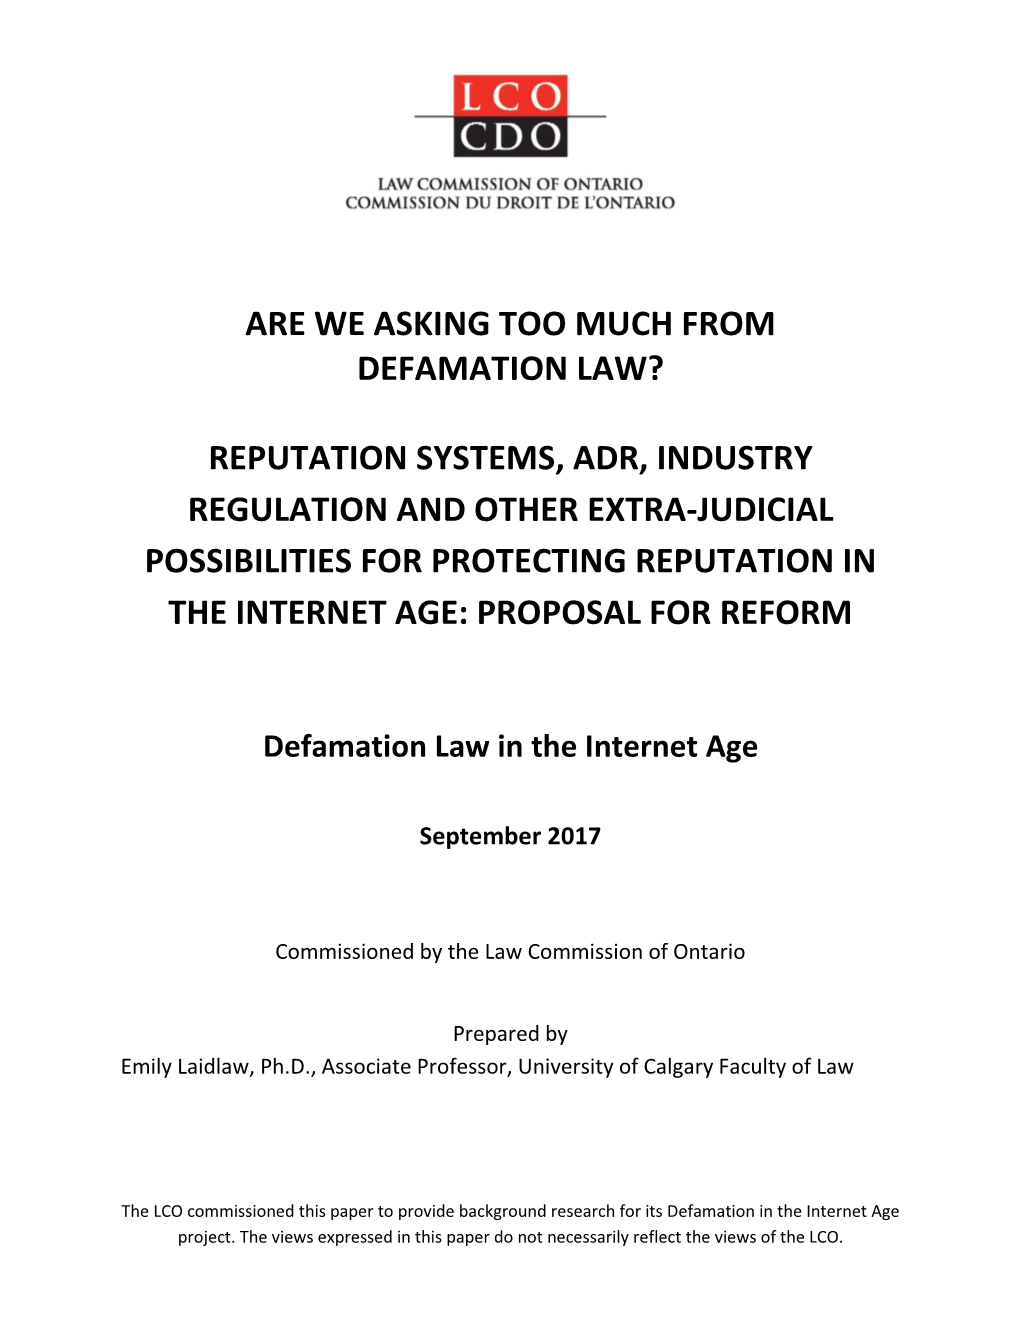 Reputation Systems, Adr, Industry Regulation and Other Extra-Judicial Possibilities for Protecting Reputation in the Internet Age: Proposal for Reform